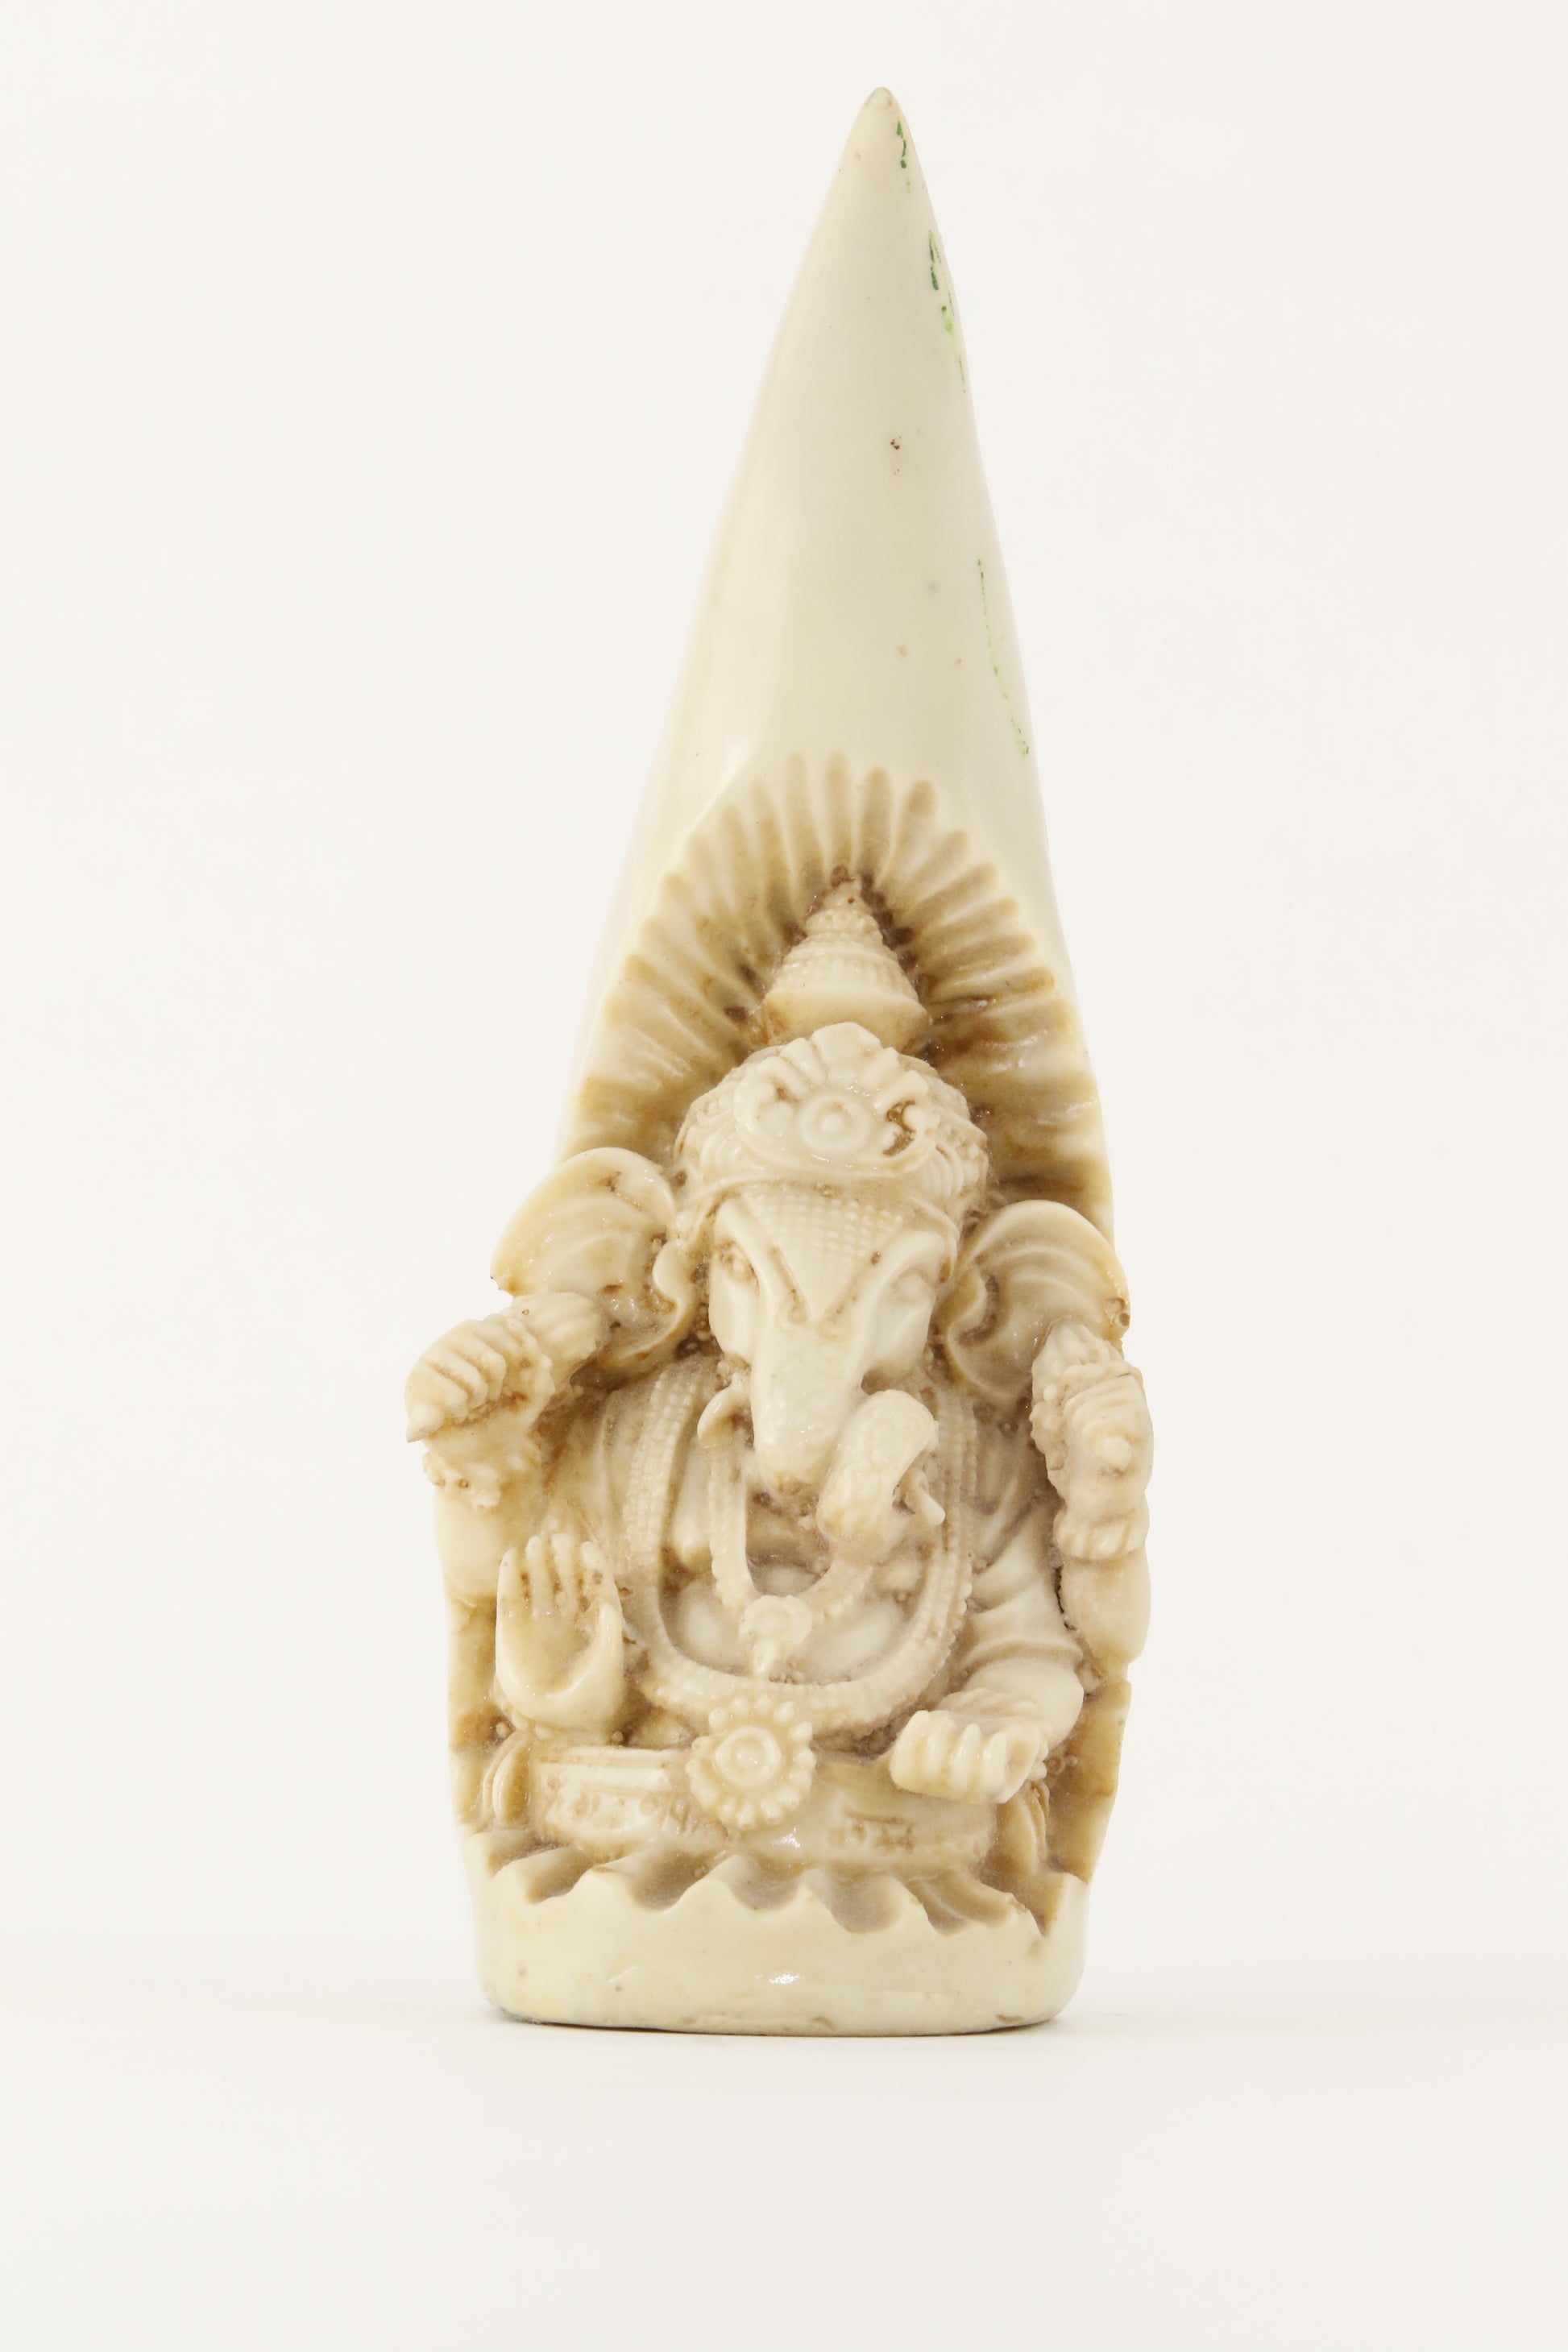 GANESHA TUSK STATUE OFFWHITE FRONT VIEW